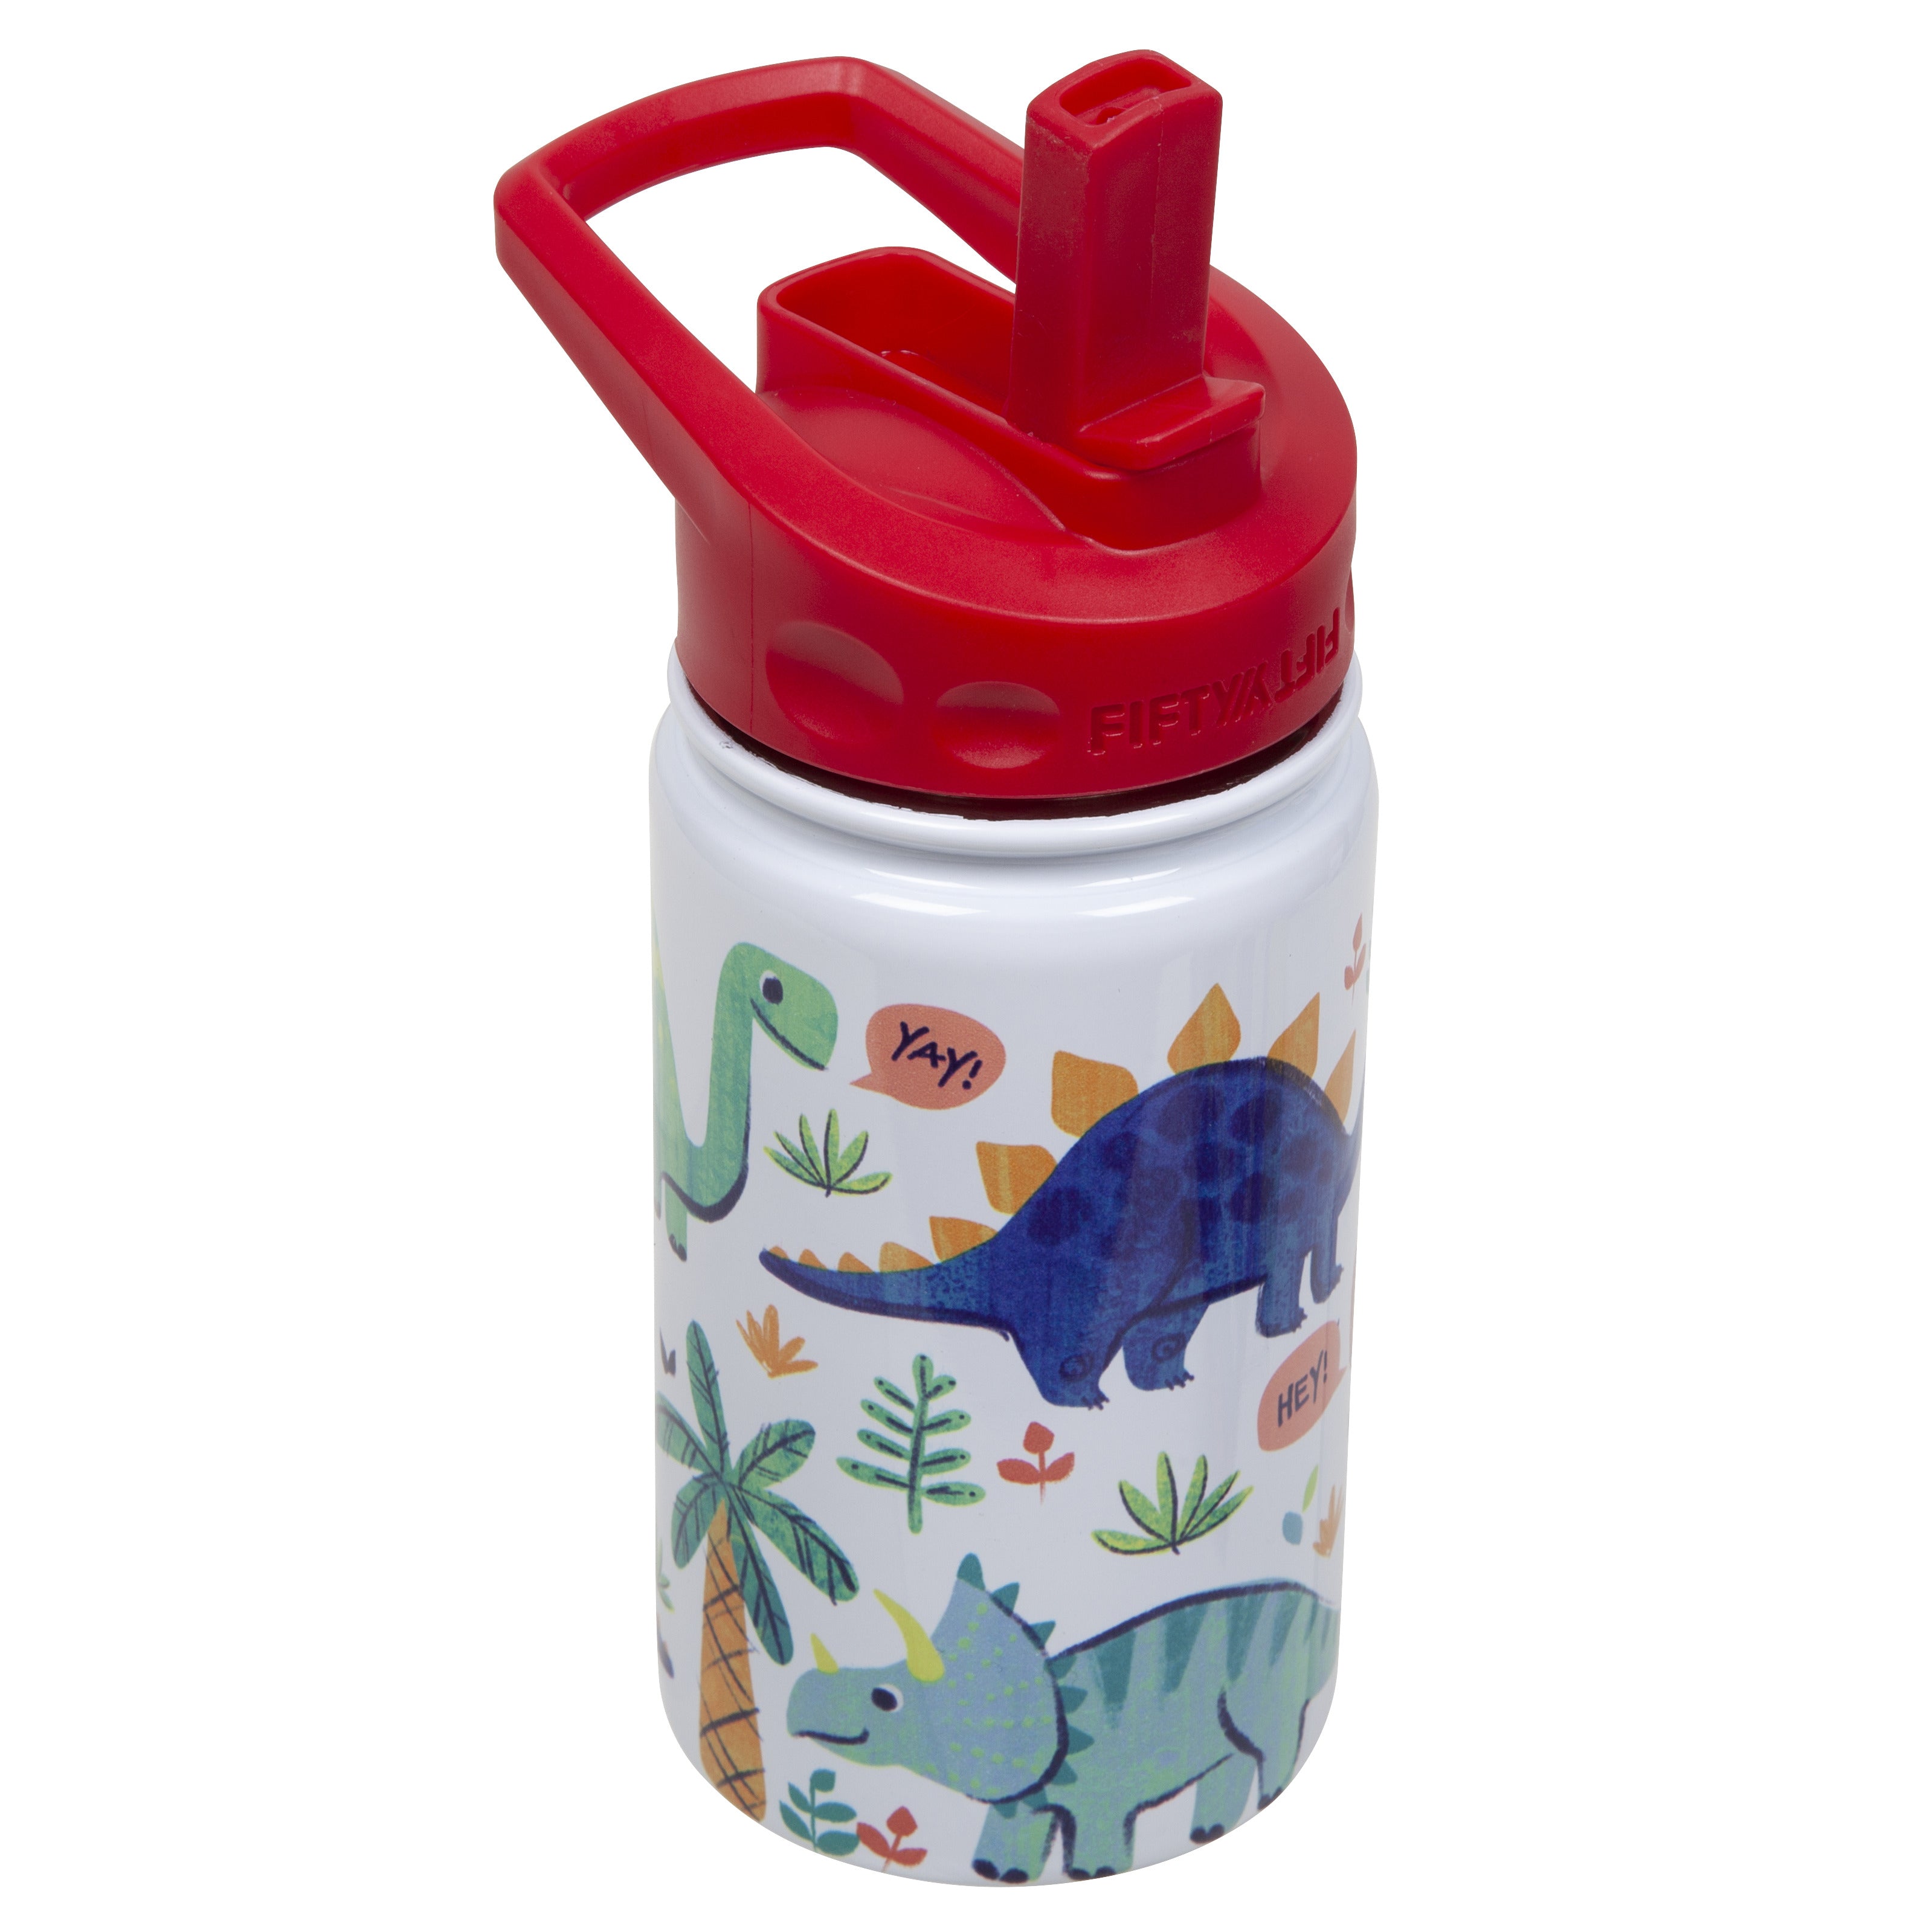 12oz Kids Bottle with Straw Cap - Dino - FIFTY/FIFTY®– FIFTY/FIFTY Bottles